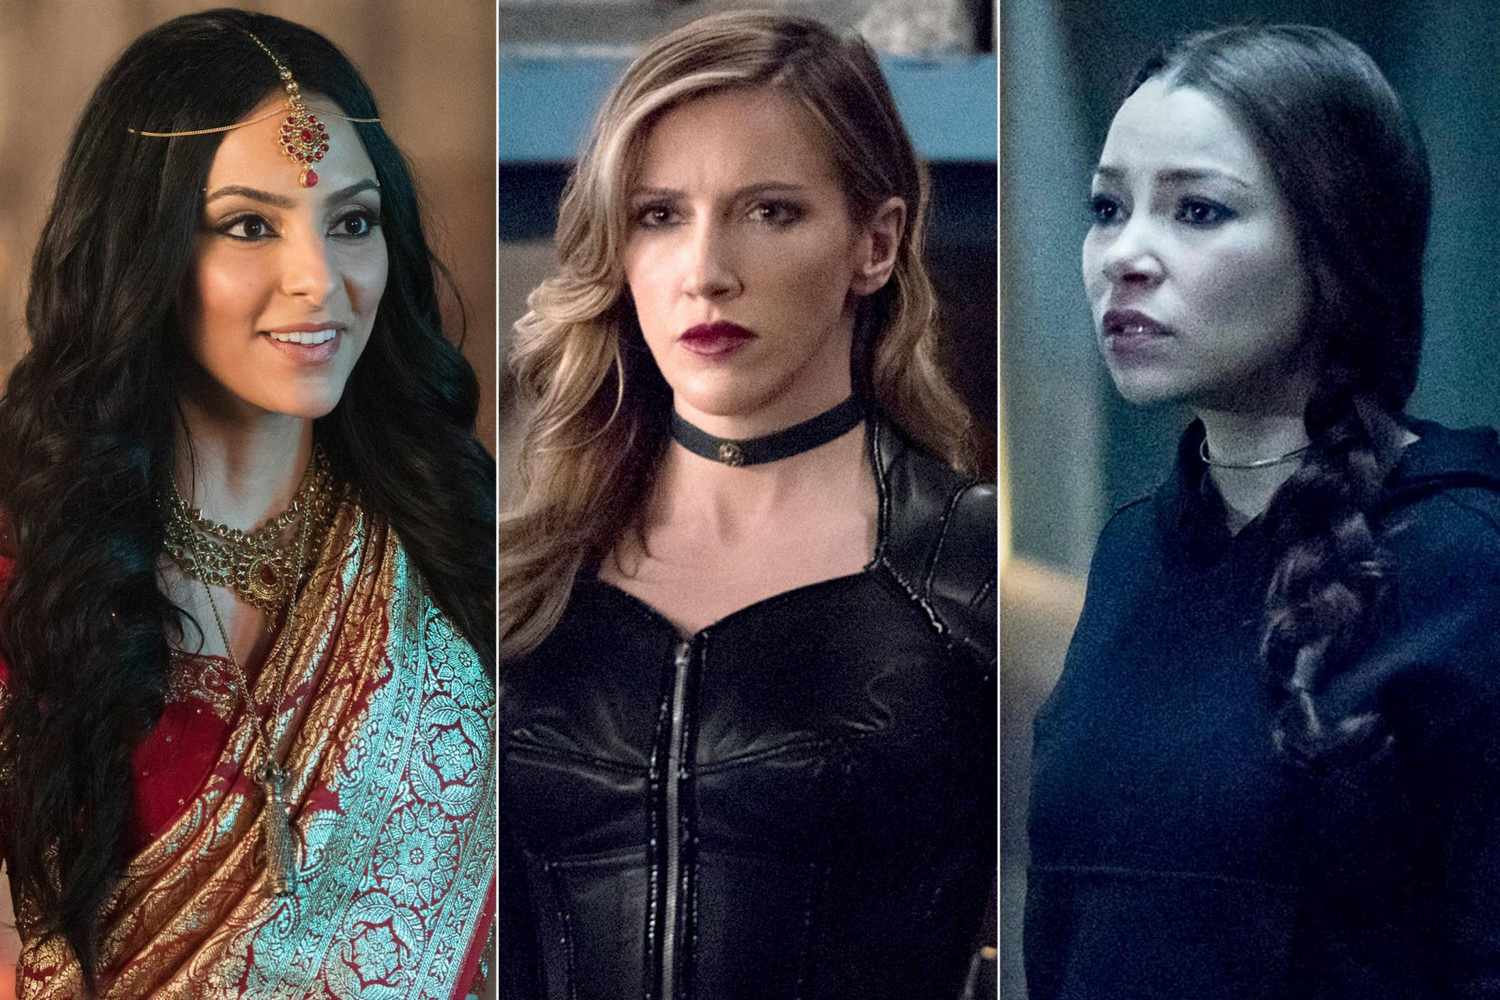 Arrow -- "Lost Canary" -- Image Number: AR718B_0225r.jpg -- Pictured: Katie Cassidy as Laurel Lance/Black Siren (center) -- Photo: Dean Buscher/The CW -- &Atilde;&Acirc;&copy; 2019 The CW Network, LLC. All Rights Reserved. DC's Legends of Tomorrow -- "S&Atilde;&Acirc;&frac12;ance & Sensibility" -- Image Number: LGN411b_0414b.jpg -- Pictured (L-R): Tala Ashe as Zari -- Photo: Dean Buscher/The CW -- &Atilde;&Acirc;&copy; 2019 The CW Network, LLC. All Rights Reserved. The Flash -- "Godspeed" -- Image Number: FLA518a_0269b.jpg -- Pictured (L-R): Everick Golding as Kev Shinick and Jessica Parker Kennedy as Nora -- Photo: Dean Buscher/The CW -- &Atilde;&Acirc;&copy; 2019 The CW Network, LLC. All rights reserved